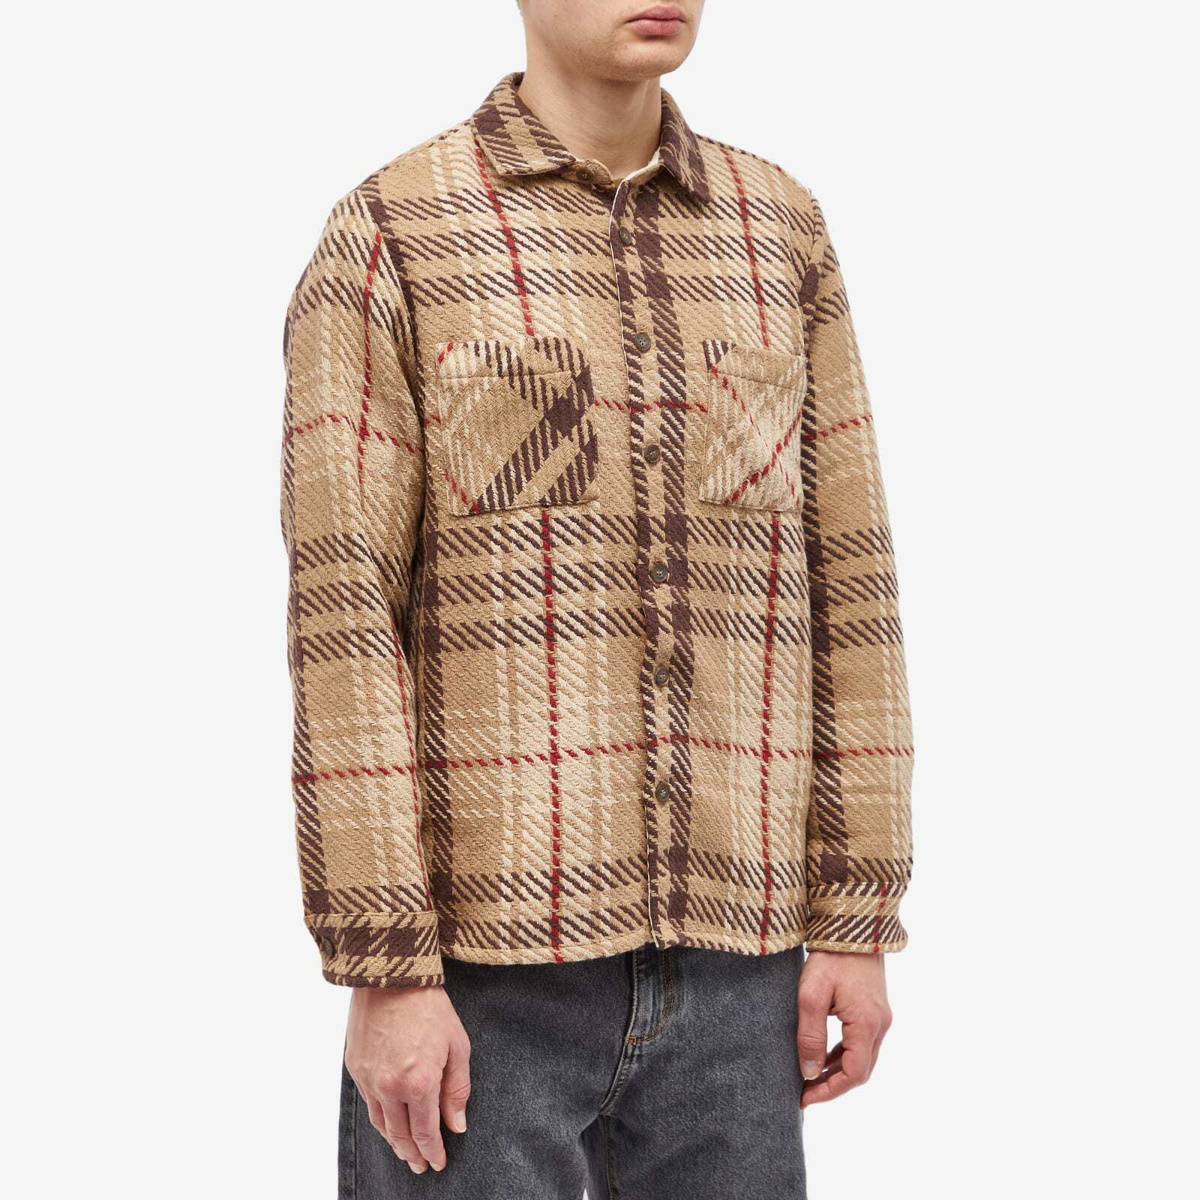 Wax London Men's Marlow Check Whiting Overshirt in Beige/Brown Wax London